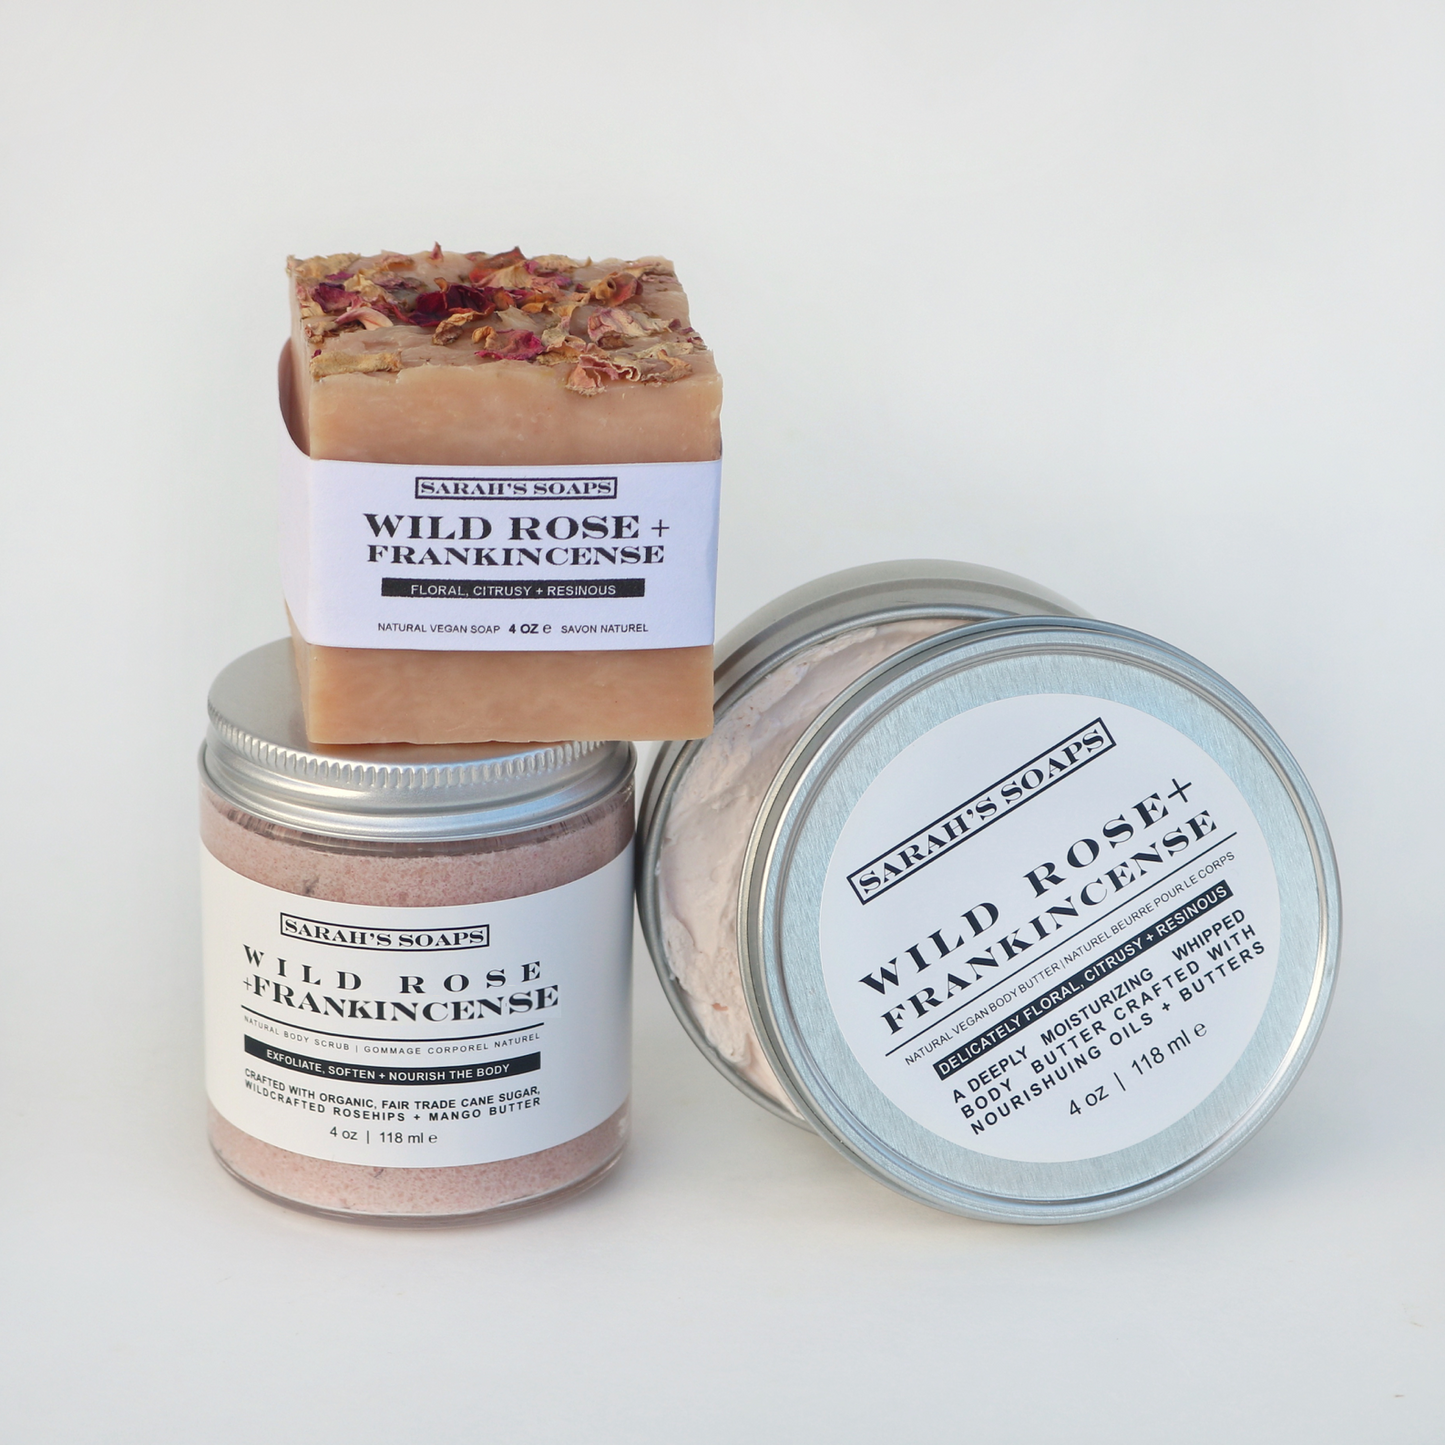 WILD ROSE + FRANKINCENSE collection